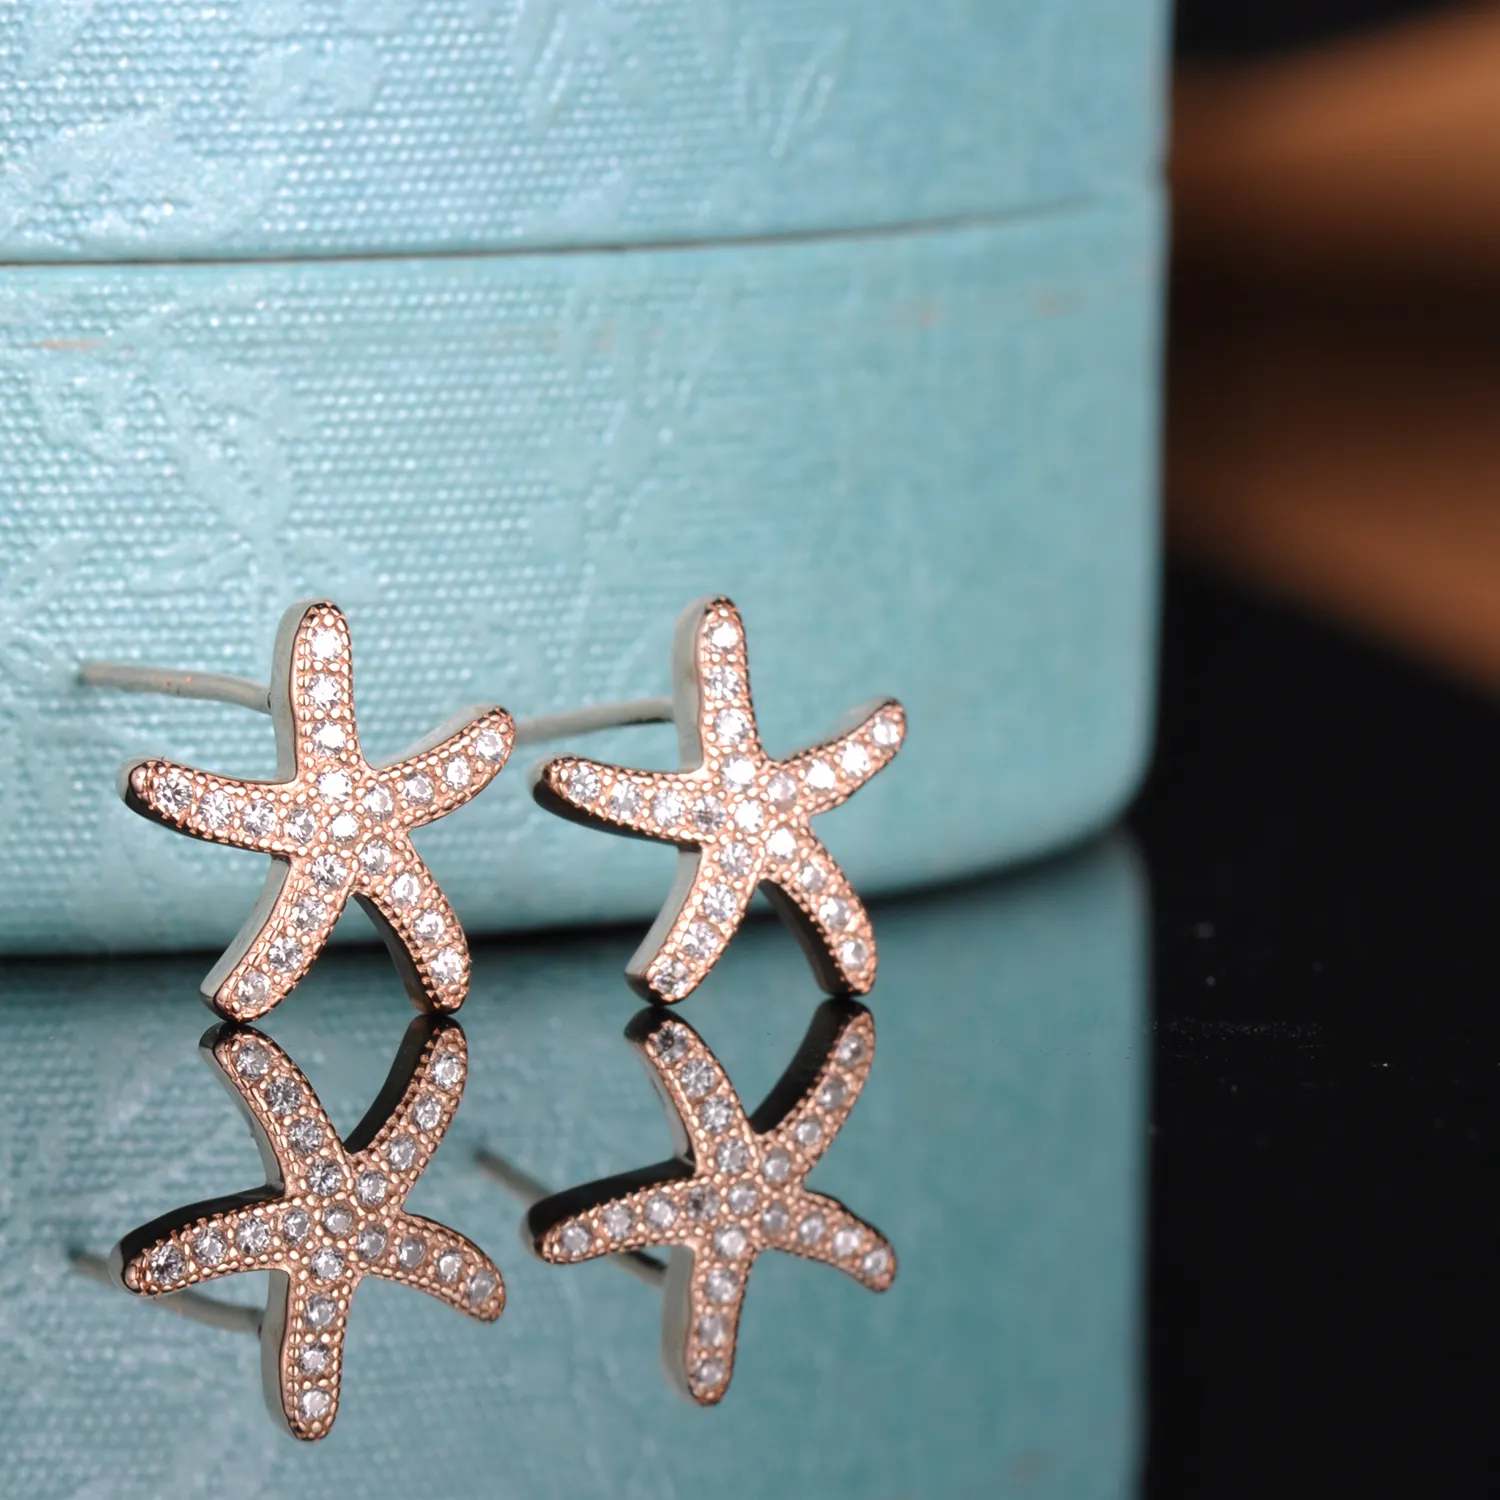 New Trendy Jewelry Lovely Starfish Inlaid Cubic Zircons Charm S925 Sterling Silver Women's Stud Earrings